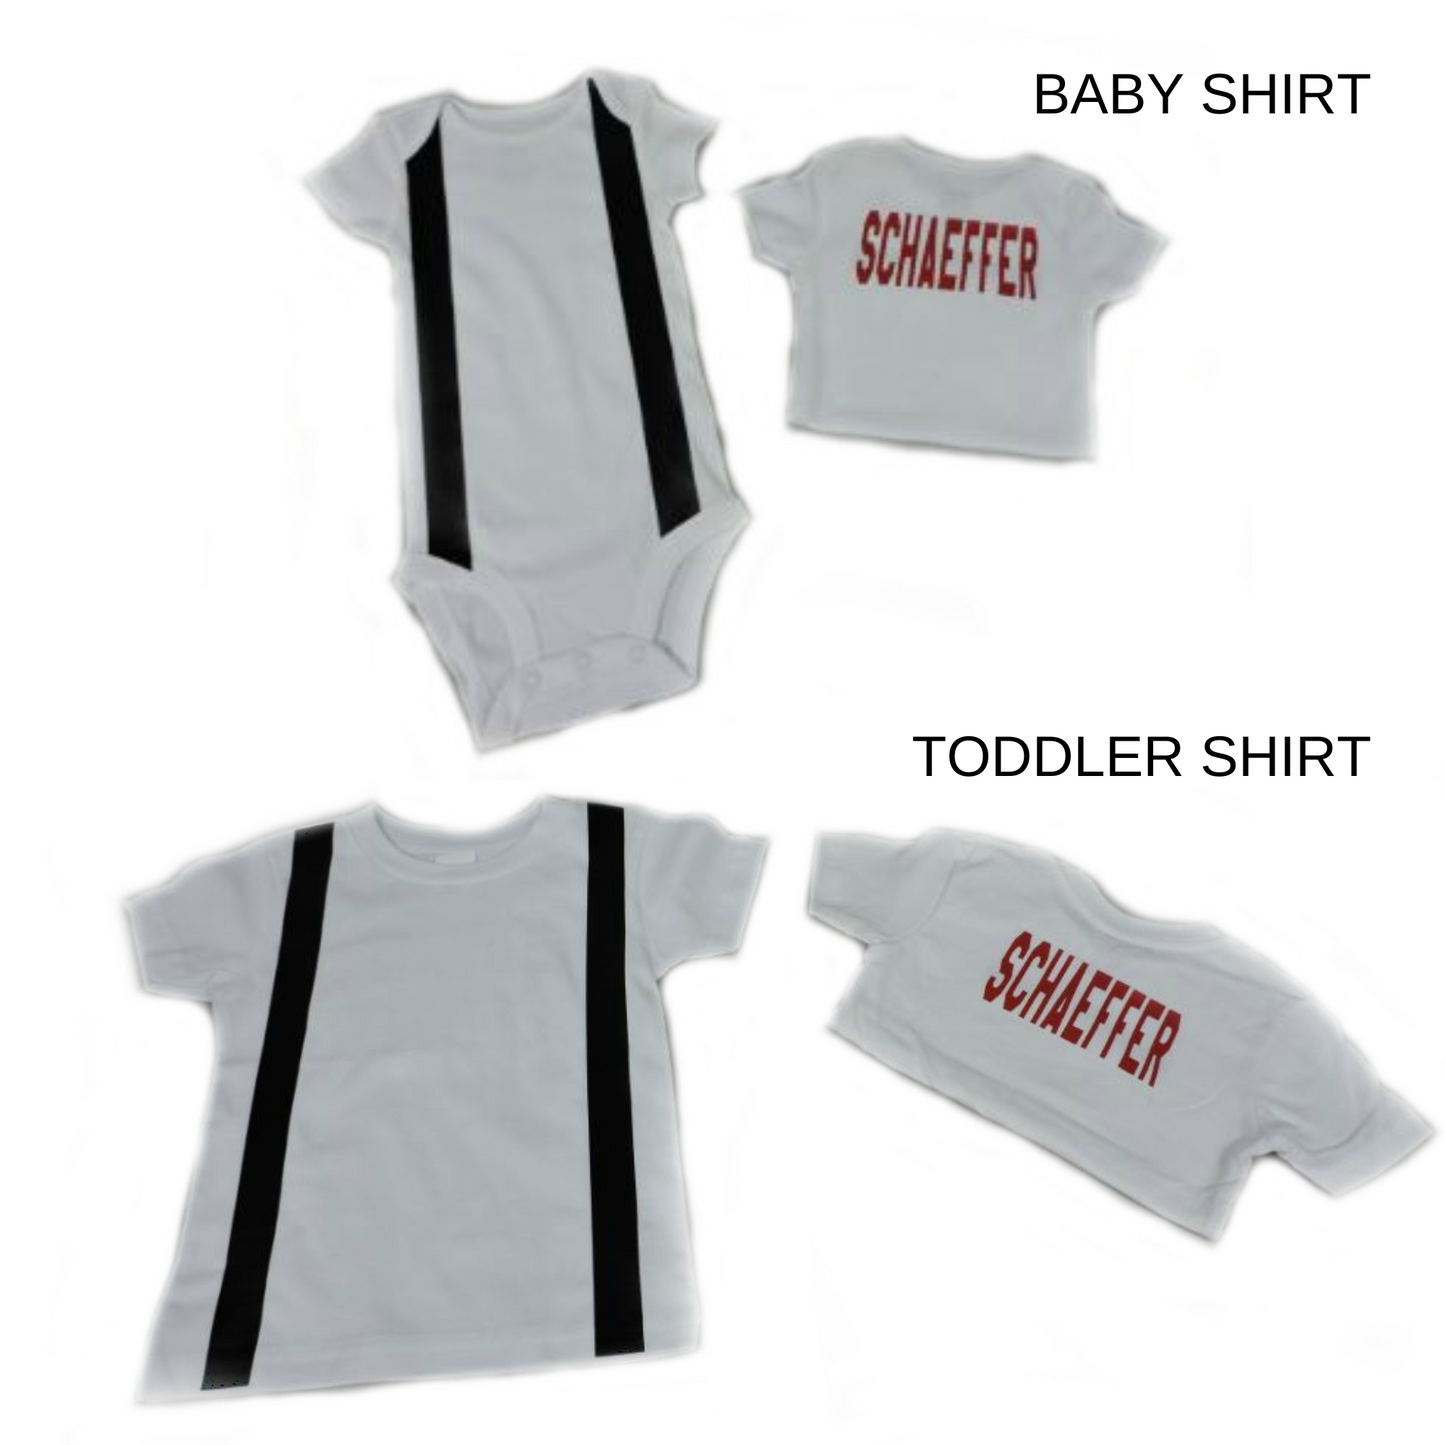 White with black suspenders Firefighter style baby And Toddler shirts